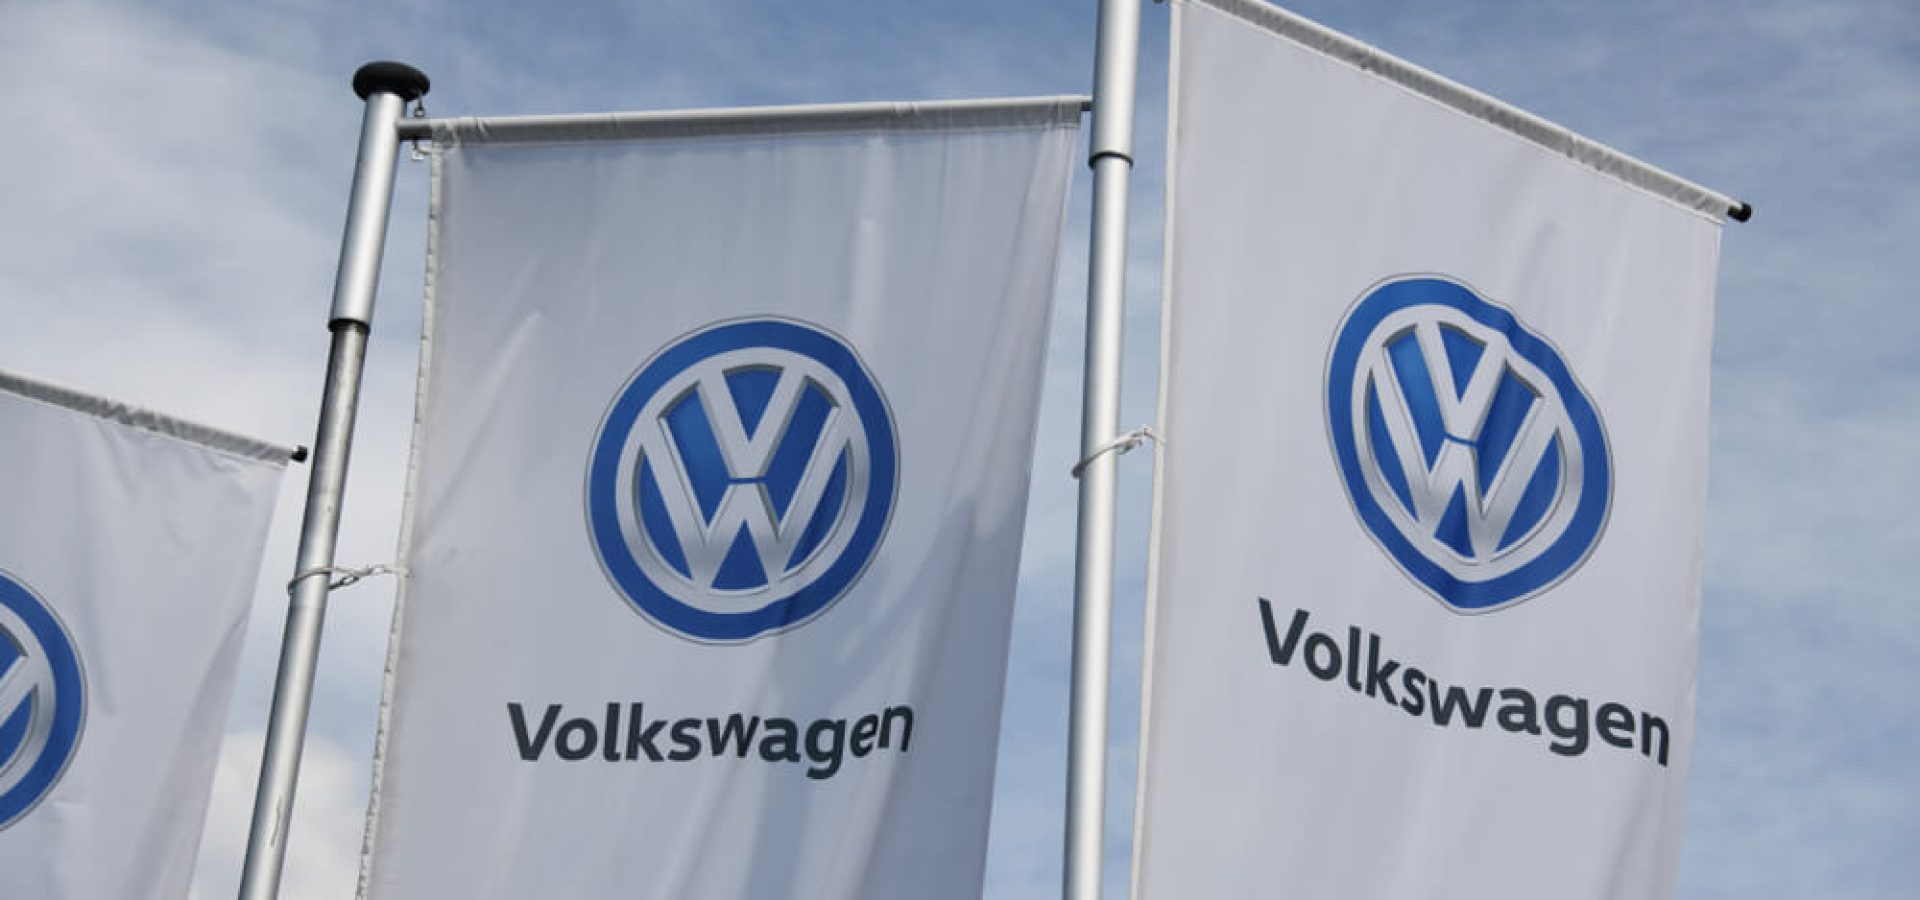 Flags with VW logo against blue sky.